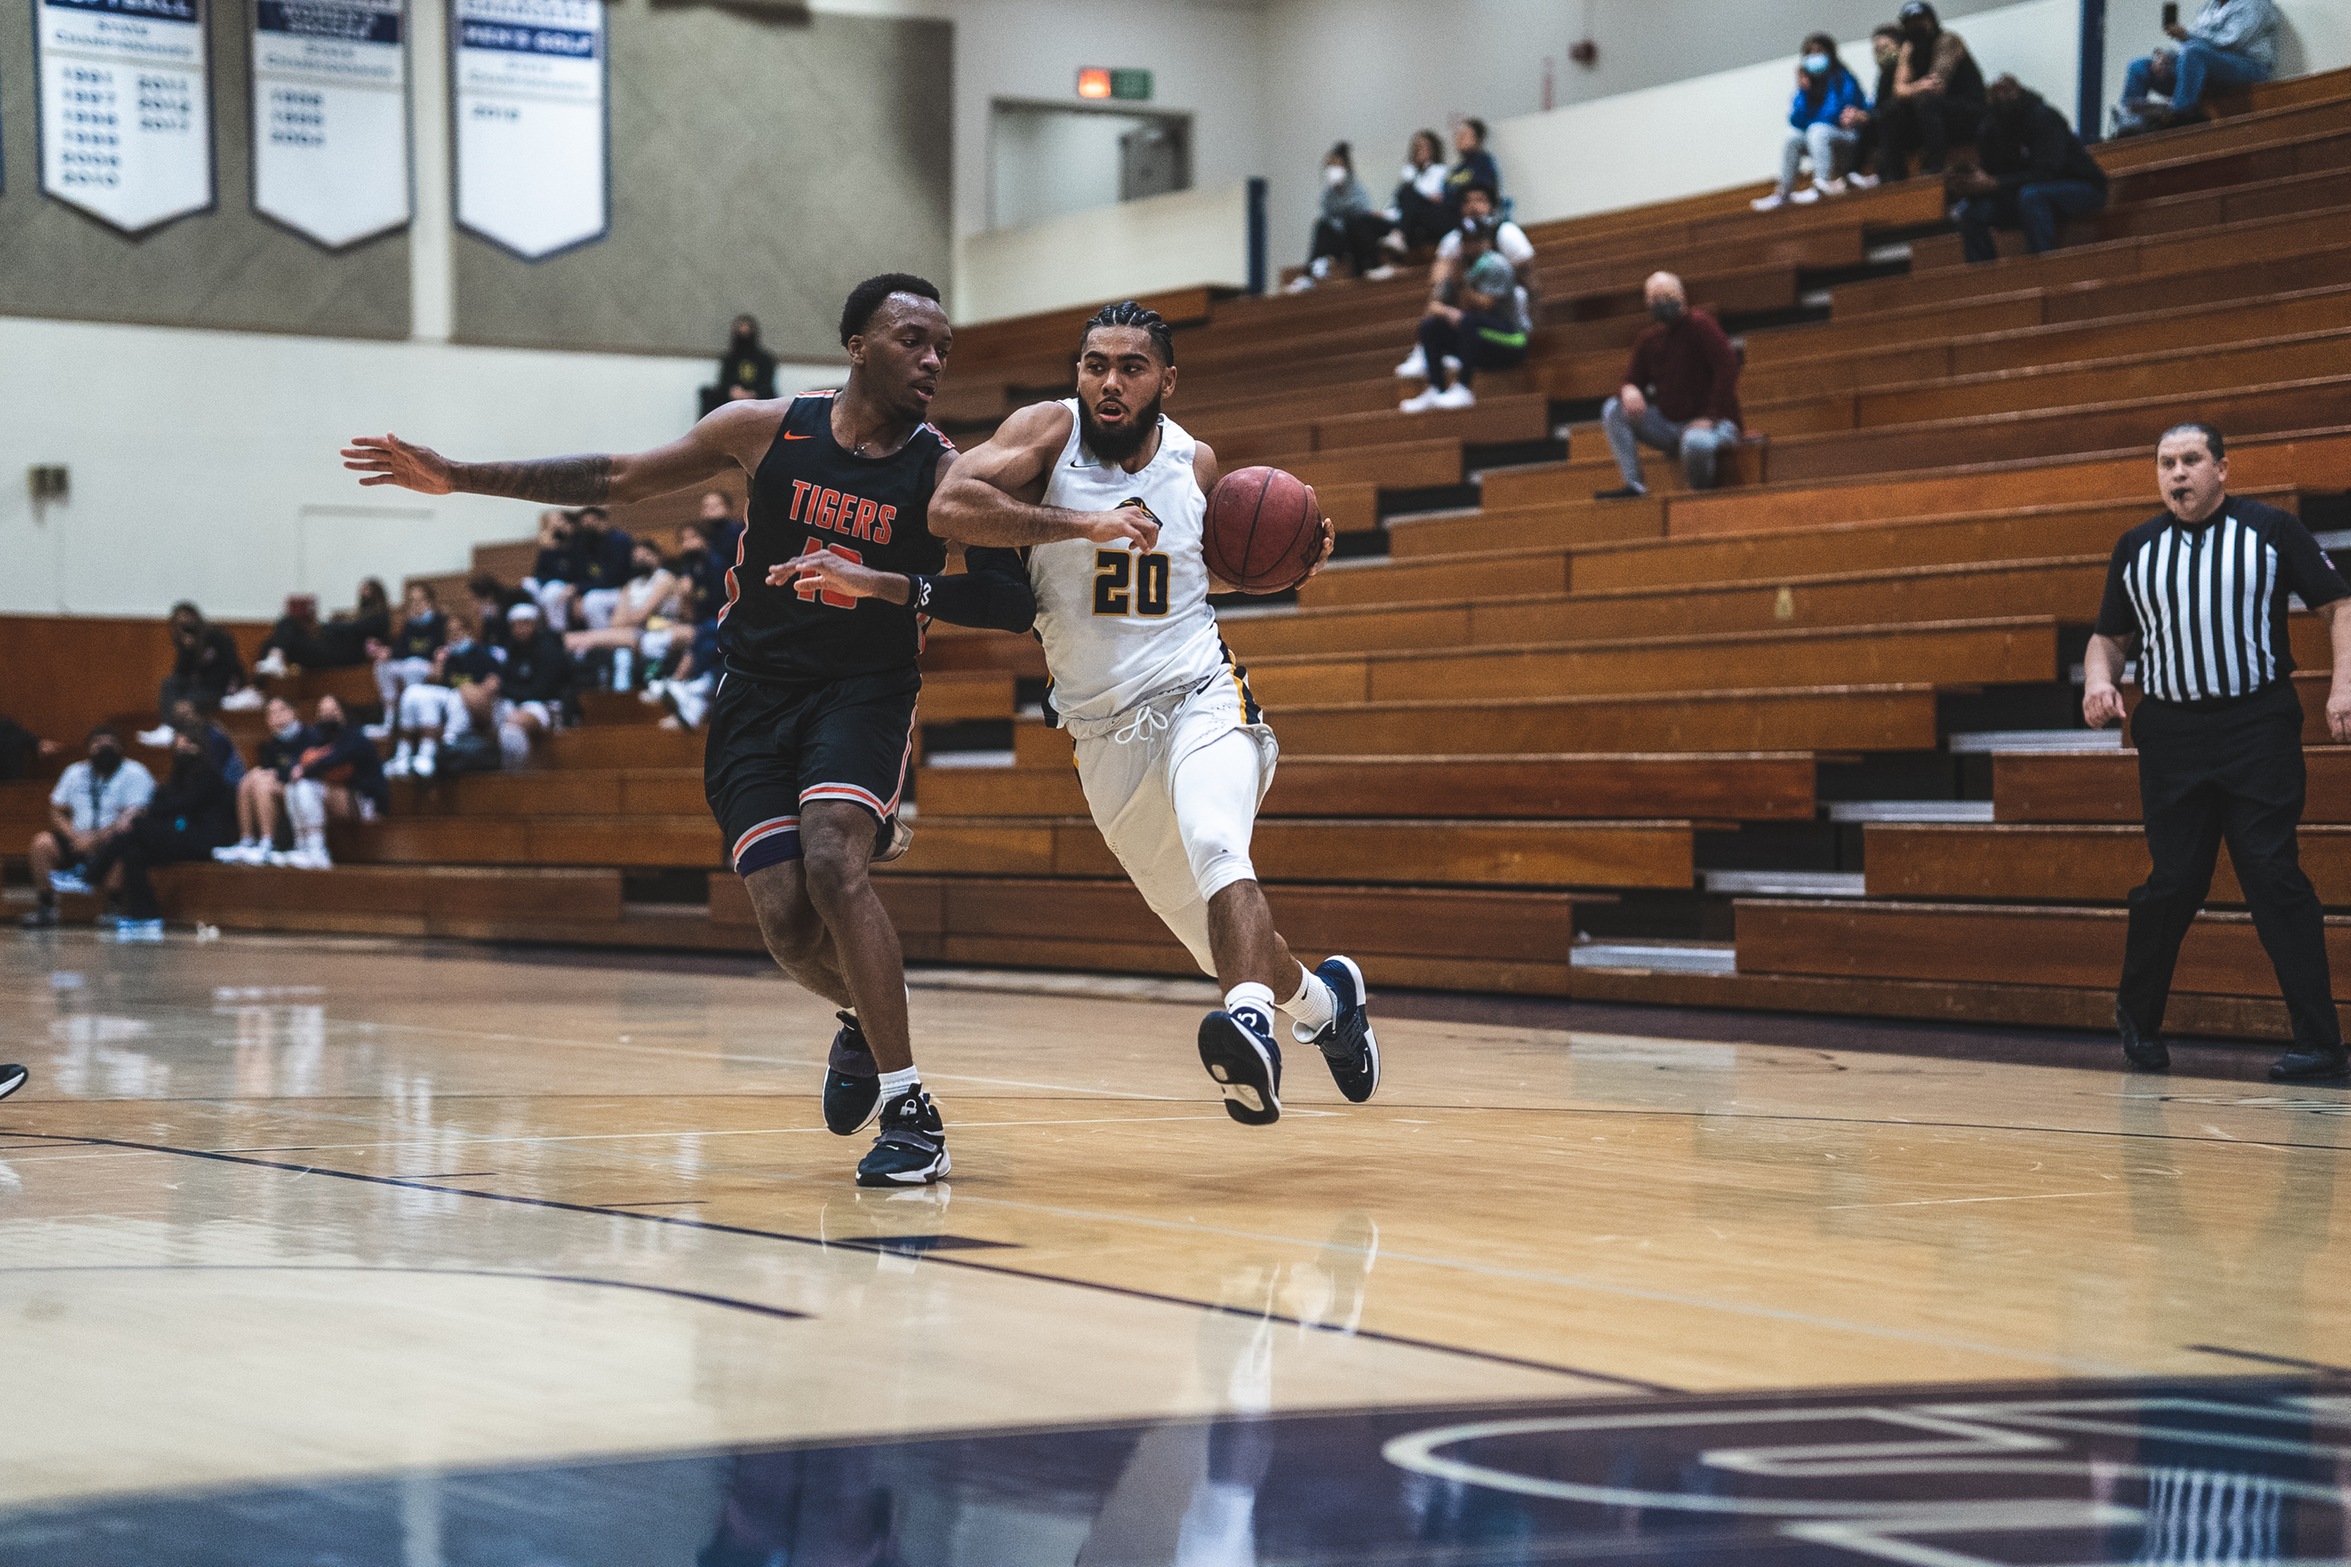 Irvine Valley Squeaks Past the Chargers, 46-44